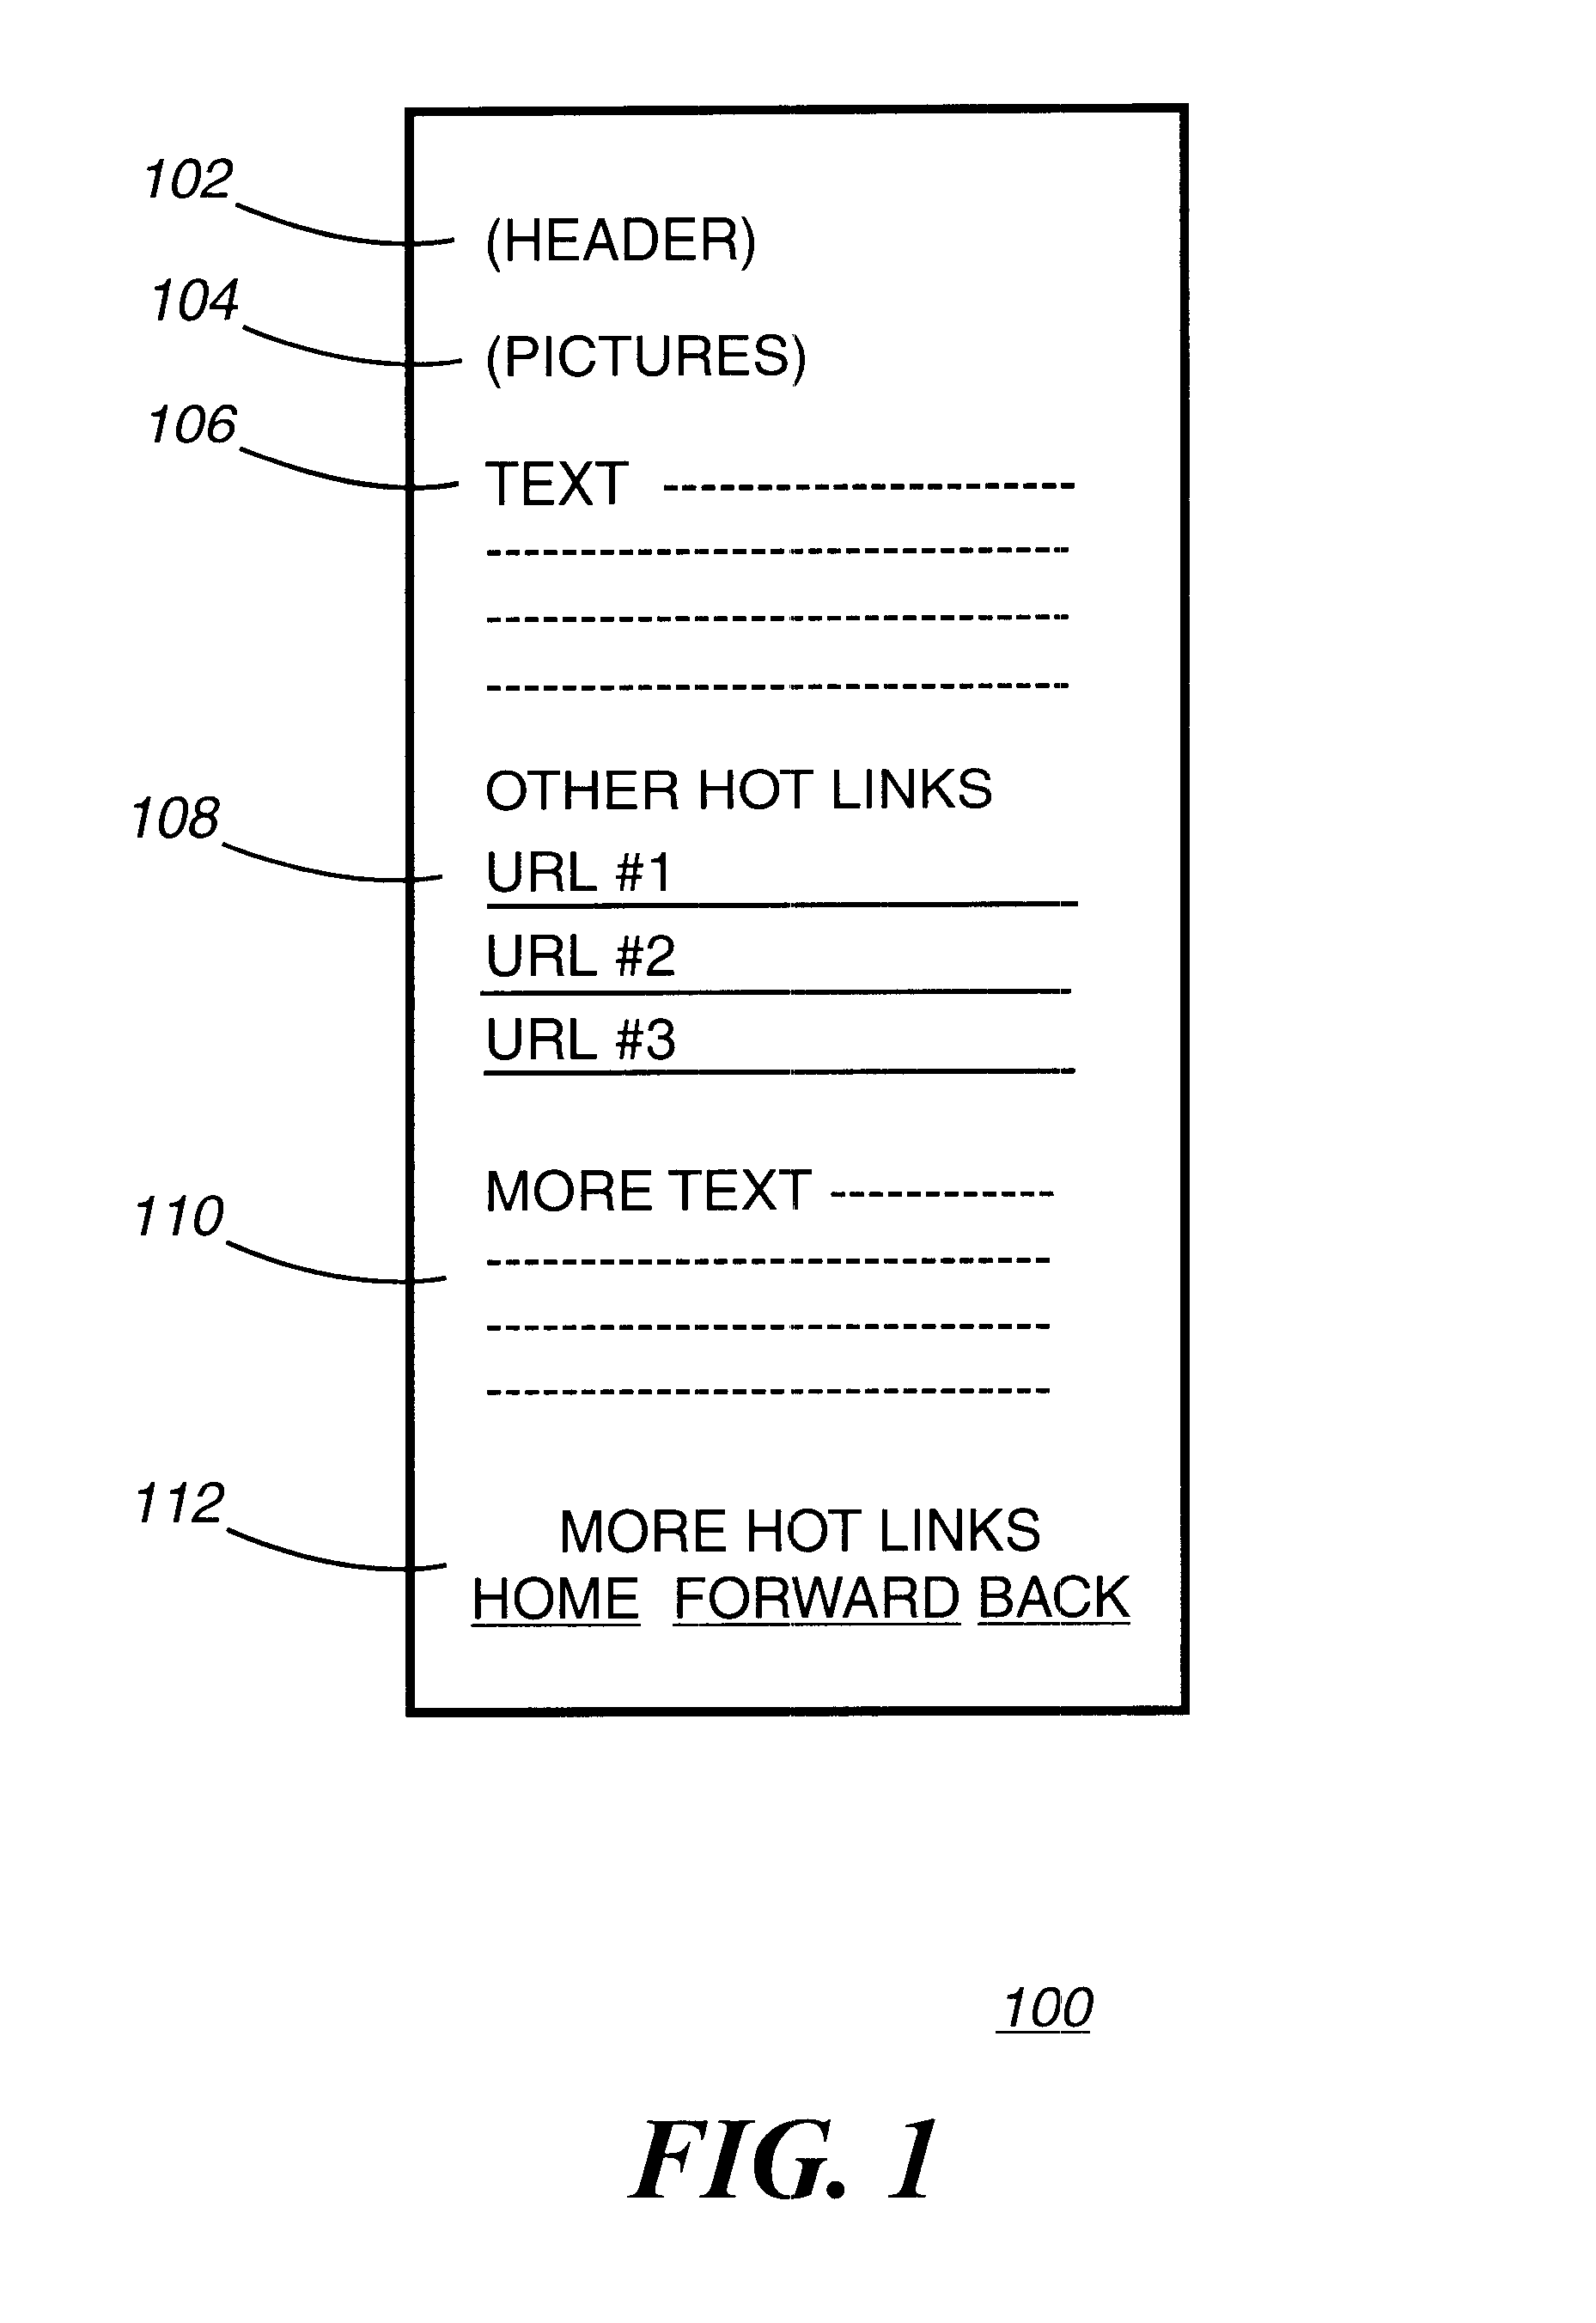 Network interactive search engine server and method